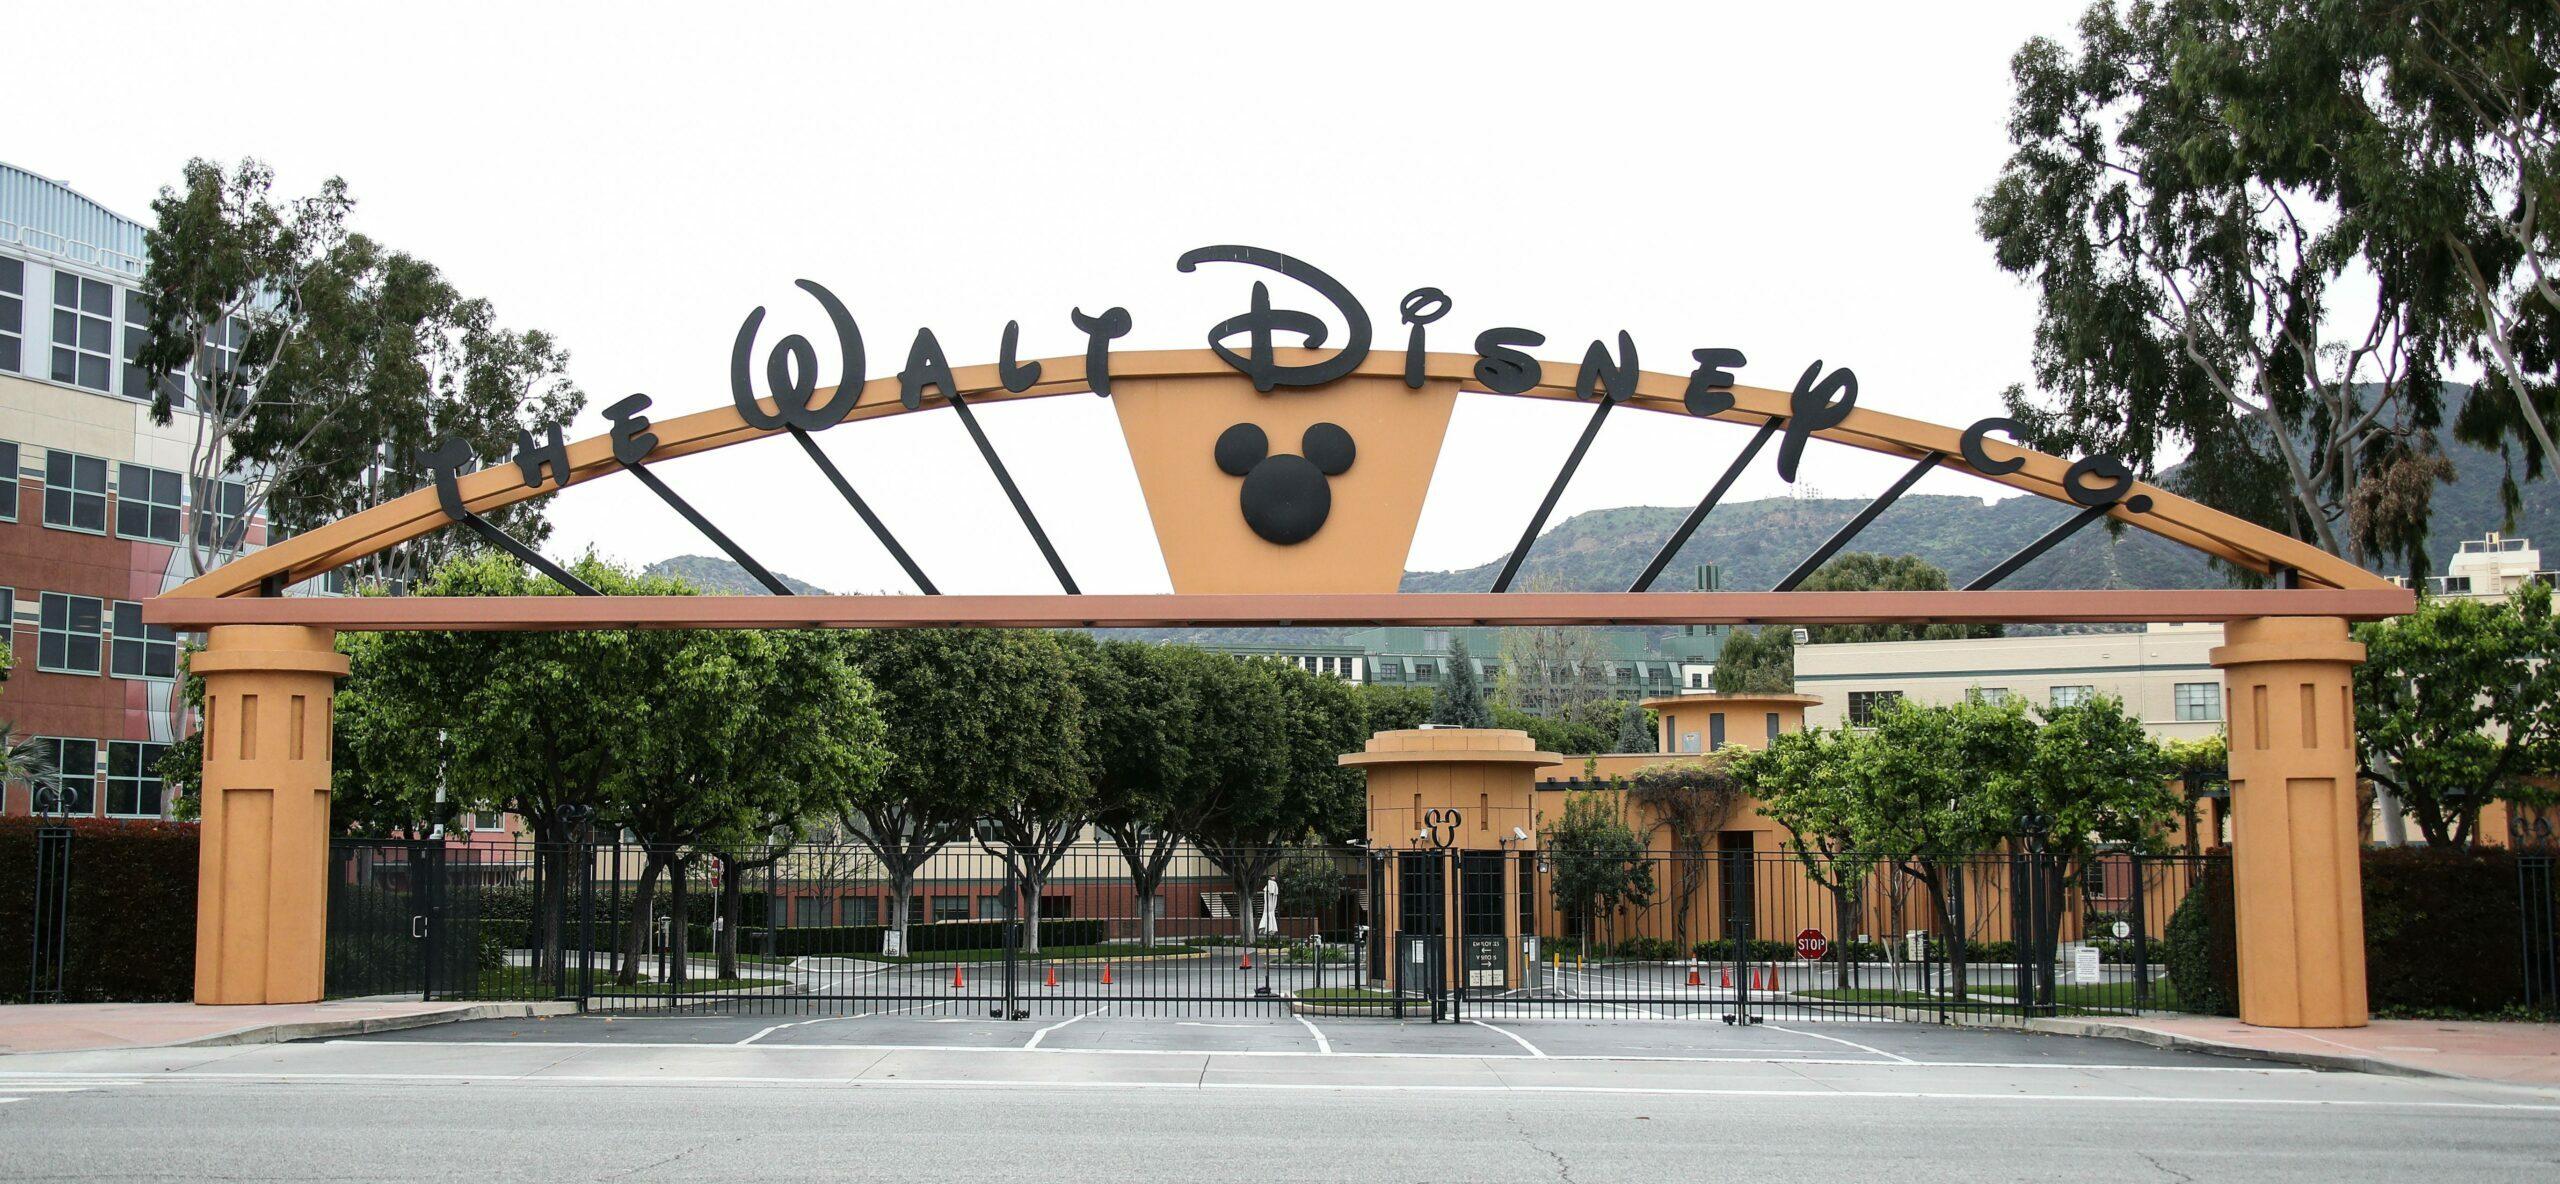 Former Disney Employee Sues Company Over Disability Accommodations